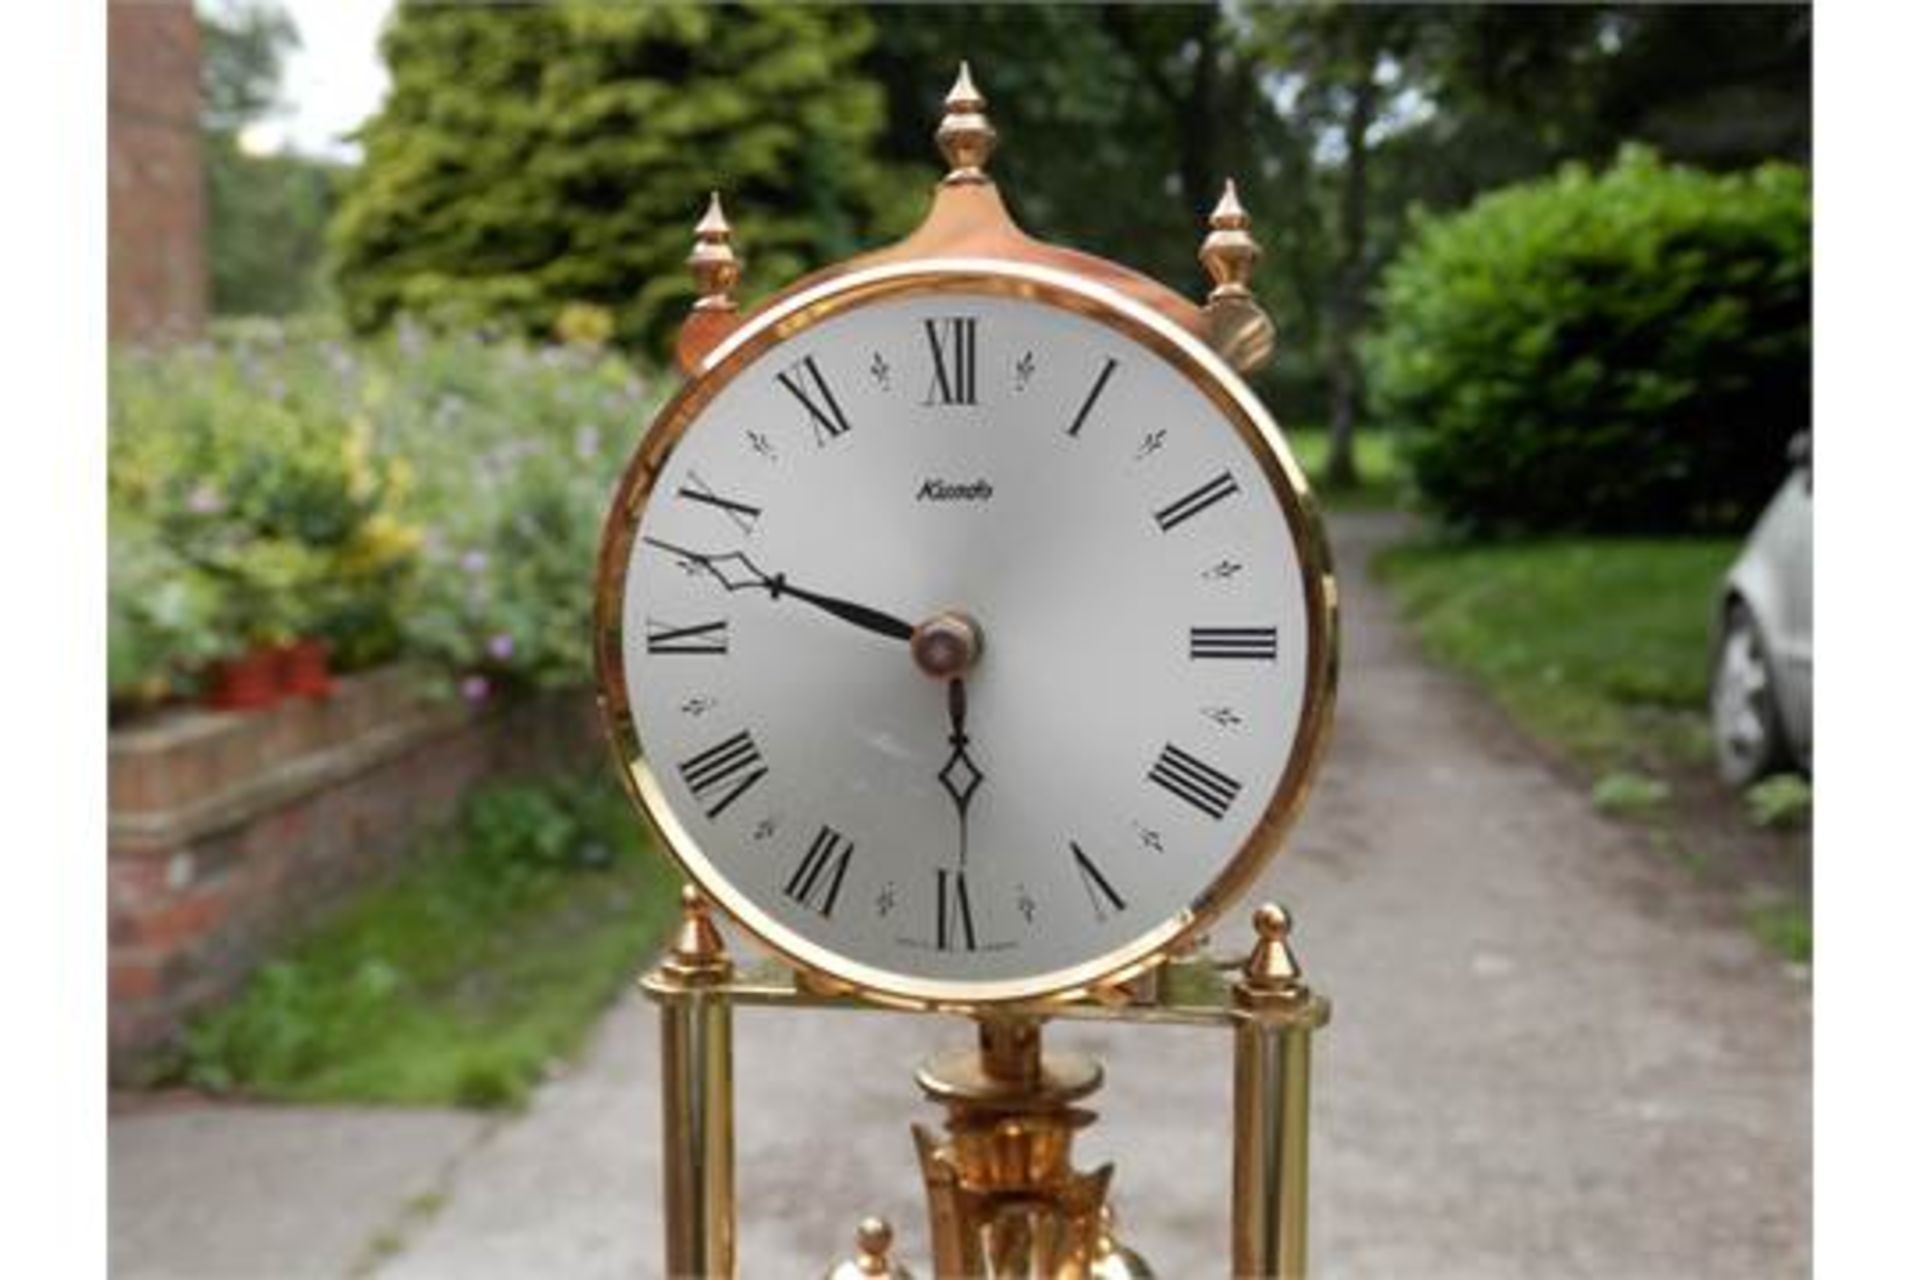 WONDERFUL BLACK FOREST WORKING 1950/60S KUNDO 400 DAY ANNIVERSARY BRASS CLOCK WITH DOME, SEE VIDEO. - Image 2 of 6